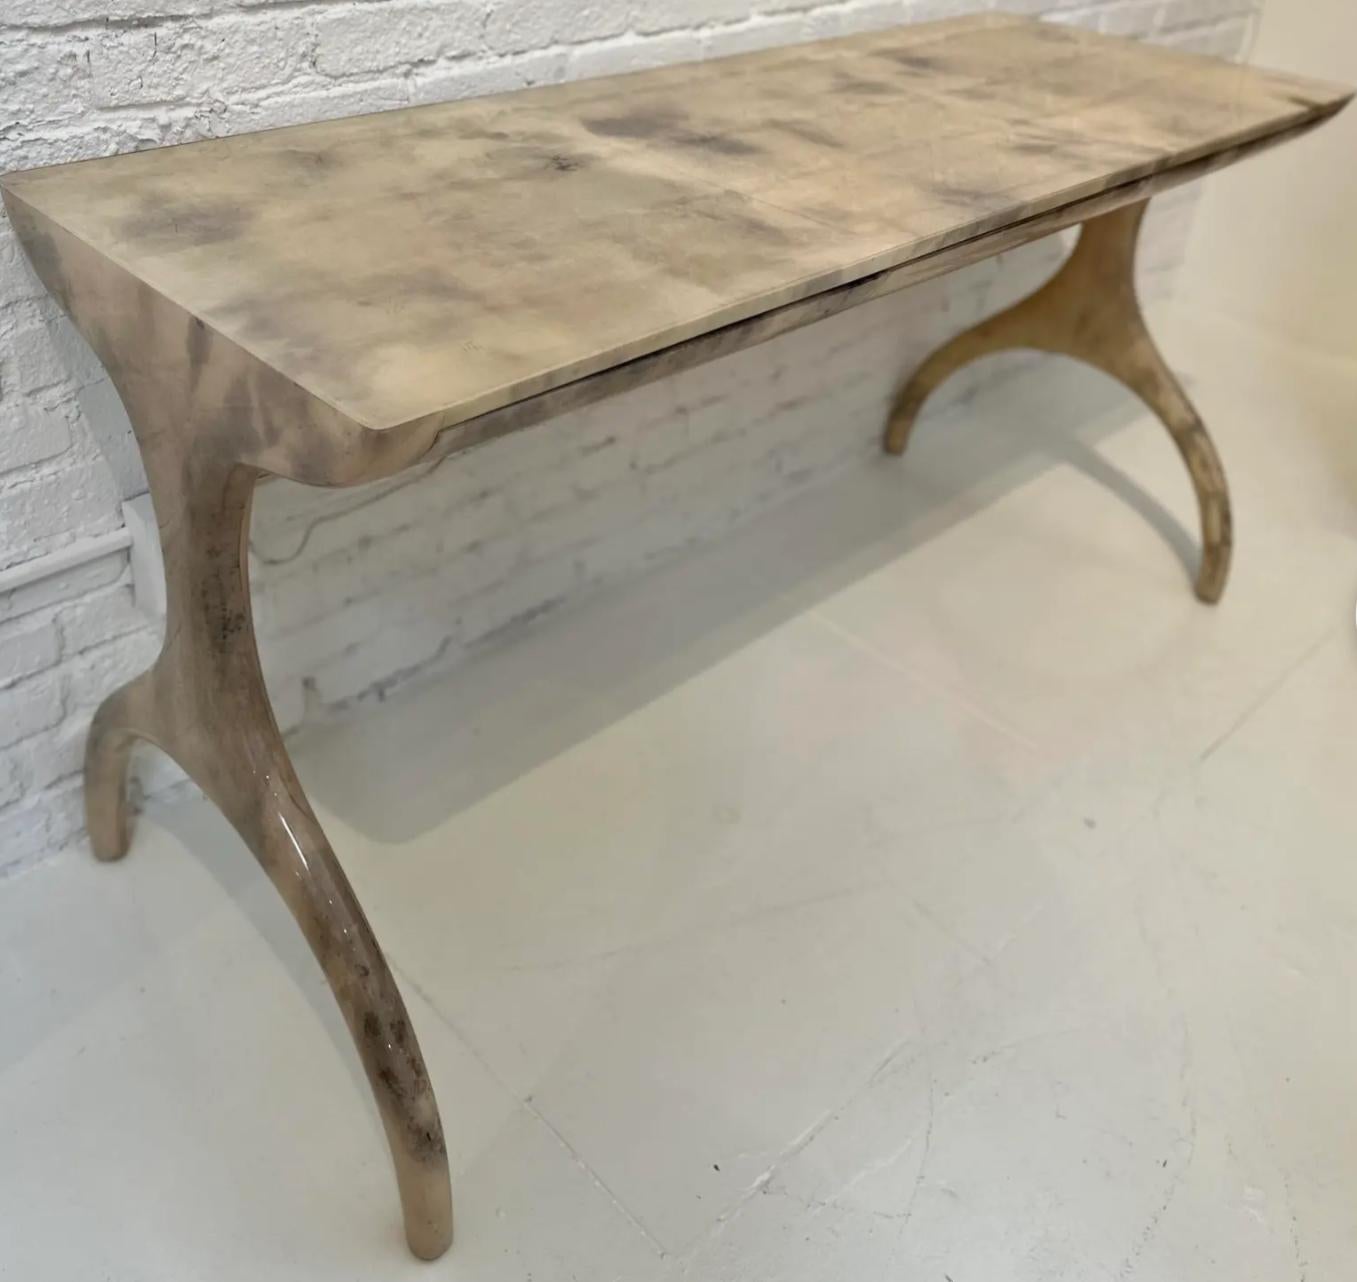 Modern Wishbone Leg Goatskin Parchment Console Writing Table Desk In Good Condition For Sale In LOS ANGELES, CA